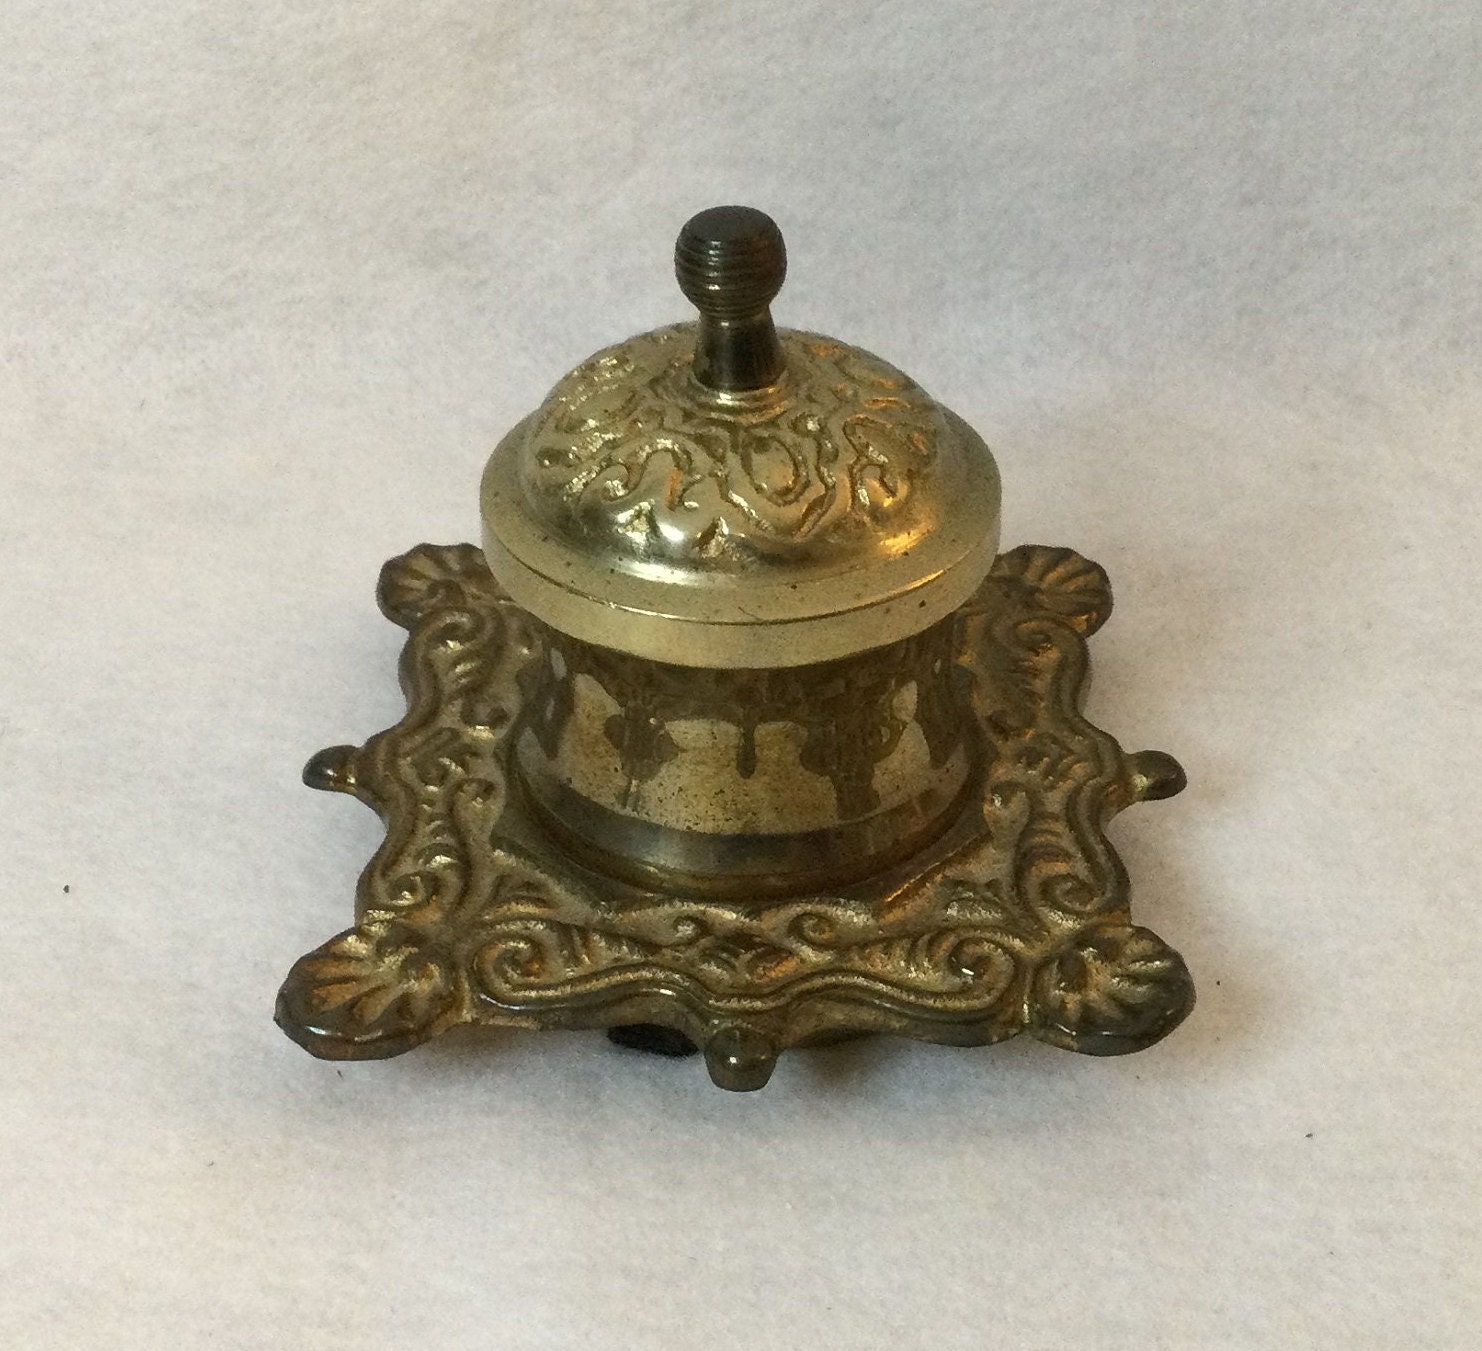 Schooner Bay Co. 3-1/4 Historical Antiqued Brass Inkwell with Quill Nib  Pens and Ink